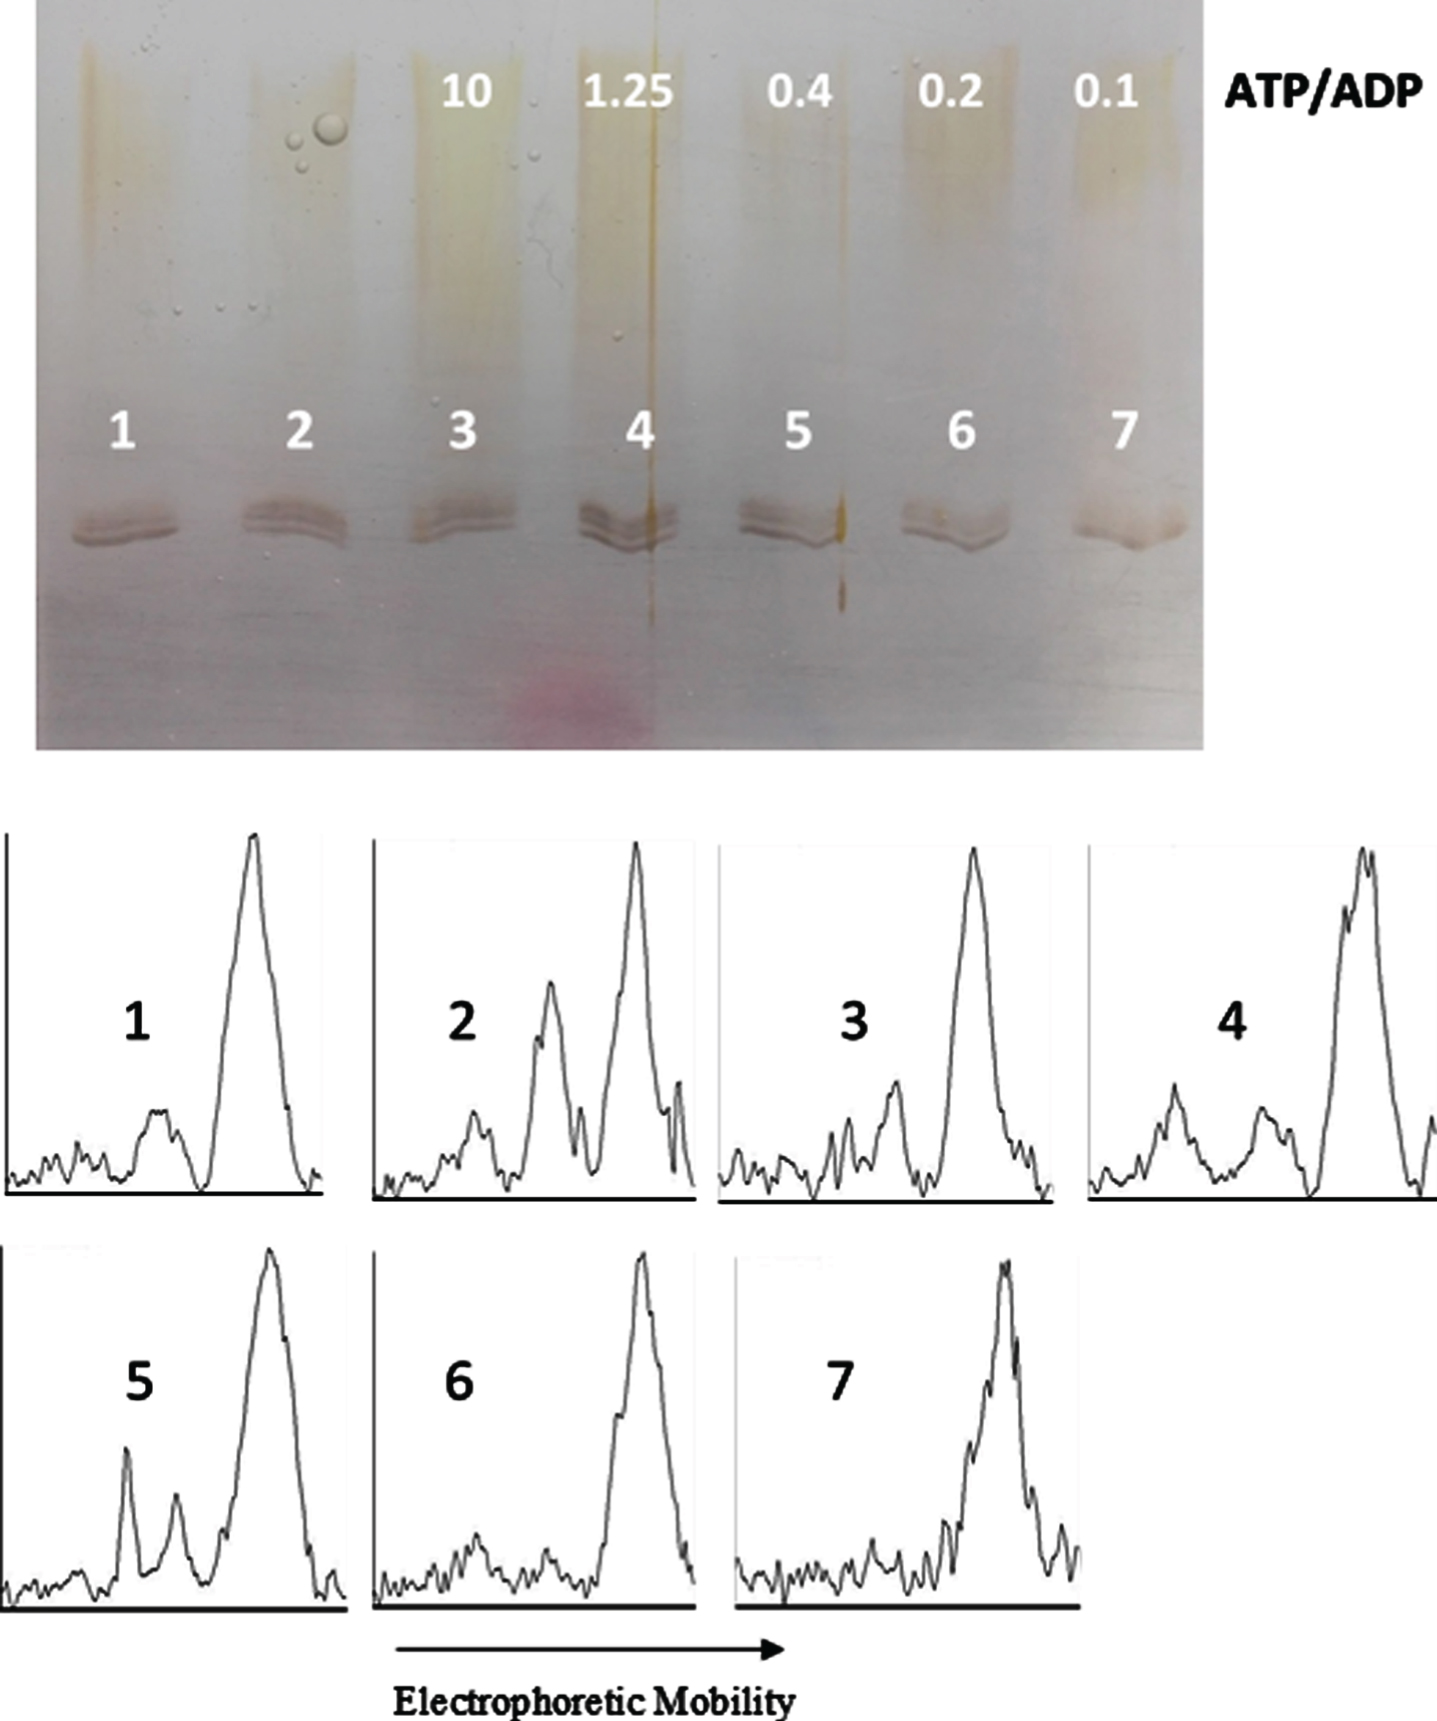 ATP/ADP ratio-dependency of tau protein phosphorylation as probed by electrophoretic mobility. The mixture of tau protein and C-PKA, prepared as described in Materials and Method (Tau-C-PKA) was diluted 1/11.5 in a buffer composed of 15 μl of 10 mM Hepes and 0.1 M NaCl at pH 7, and 10 μl of phosphate buffer containing 250 mM phosphate and 0.1 mg/ml Ampicillin at pH 7. This reaction mixture contained 15 mM MgCl2, 0.25 mM EGTA, 0.25 mM 2-mercaptoethanol, ATP 0.1 mM and the following ADP concentrations (mM): 0 (lane 2), 0.01 (lane 3), 0.08 (lane 4), 0.25 (lane 5), 0.5 (lane 6), and 1 (lane 7). Lane 1 is a control in the absence of nucleotides. All samples were incubated at 20°C for 22 h. Scanning results are included in Table 1. The rolling ball radius used for subtraction of background was of 11 pixels.